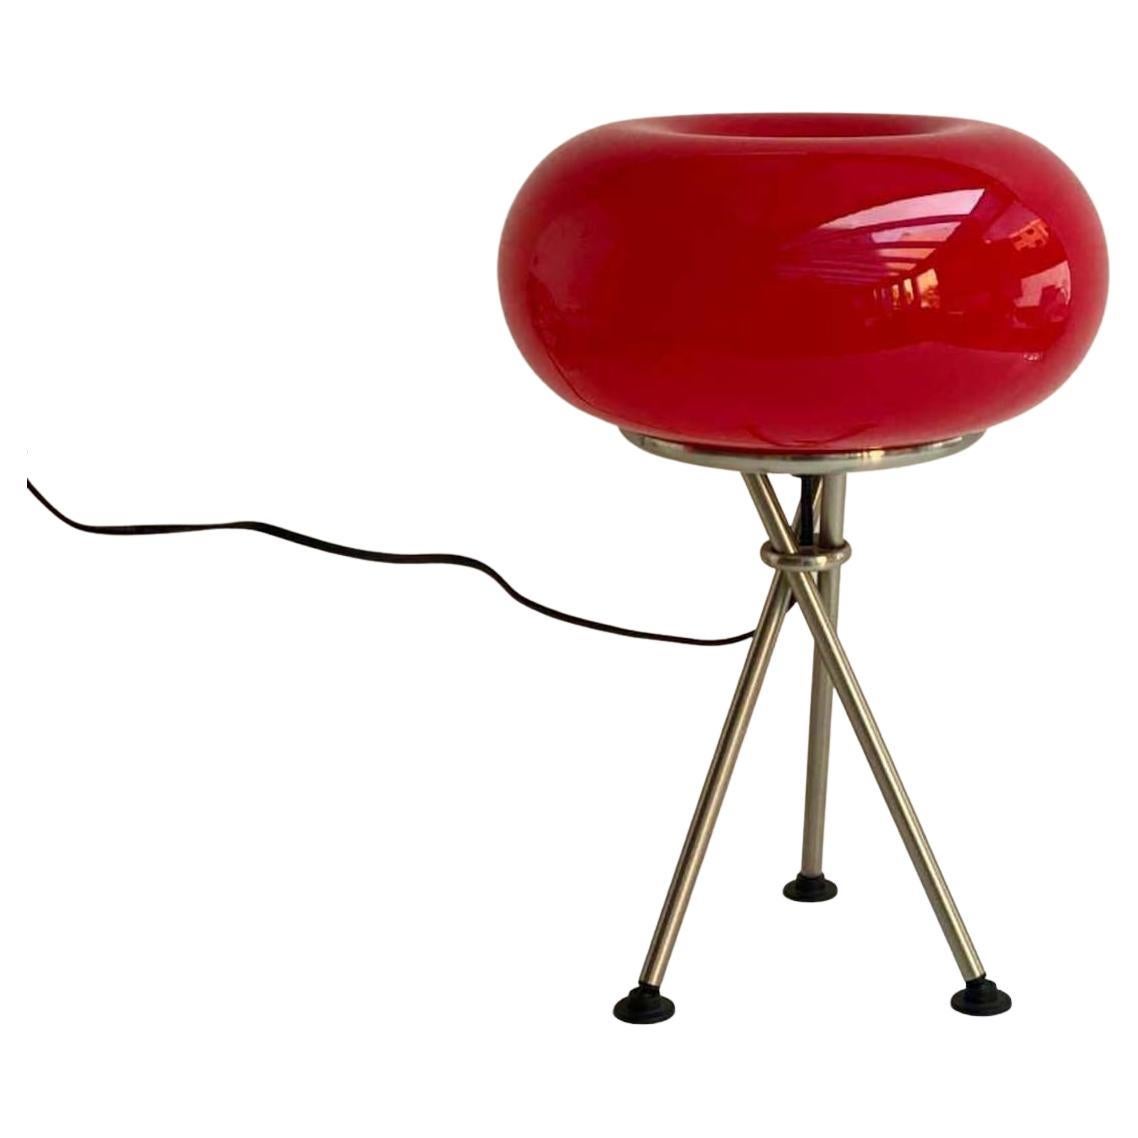 Vintage Red Table Lamp Chromed Metal Tripod Base and Glass Shade, Germany, 70s